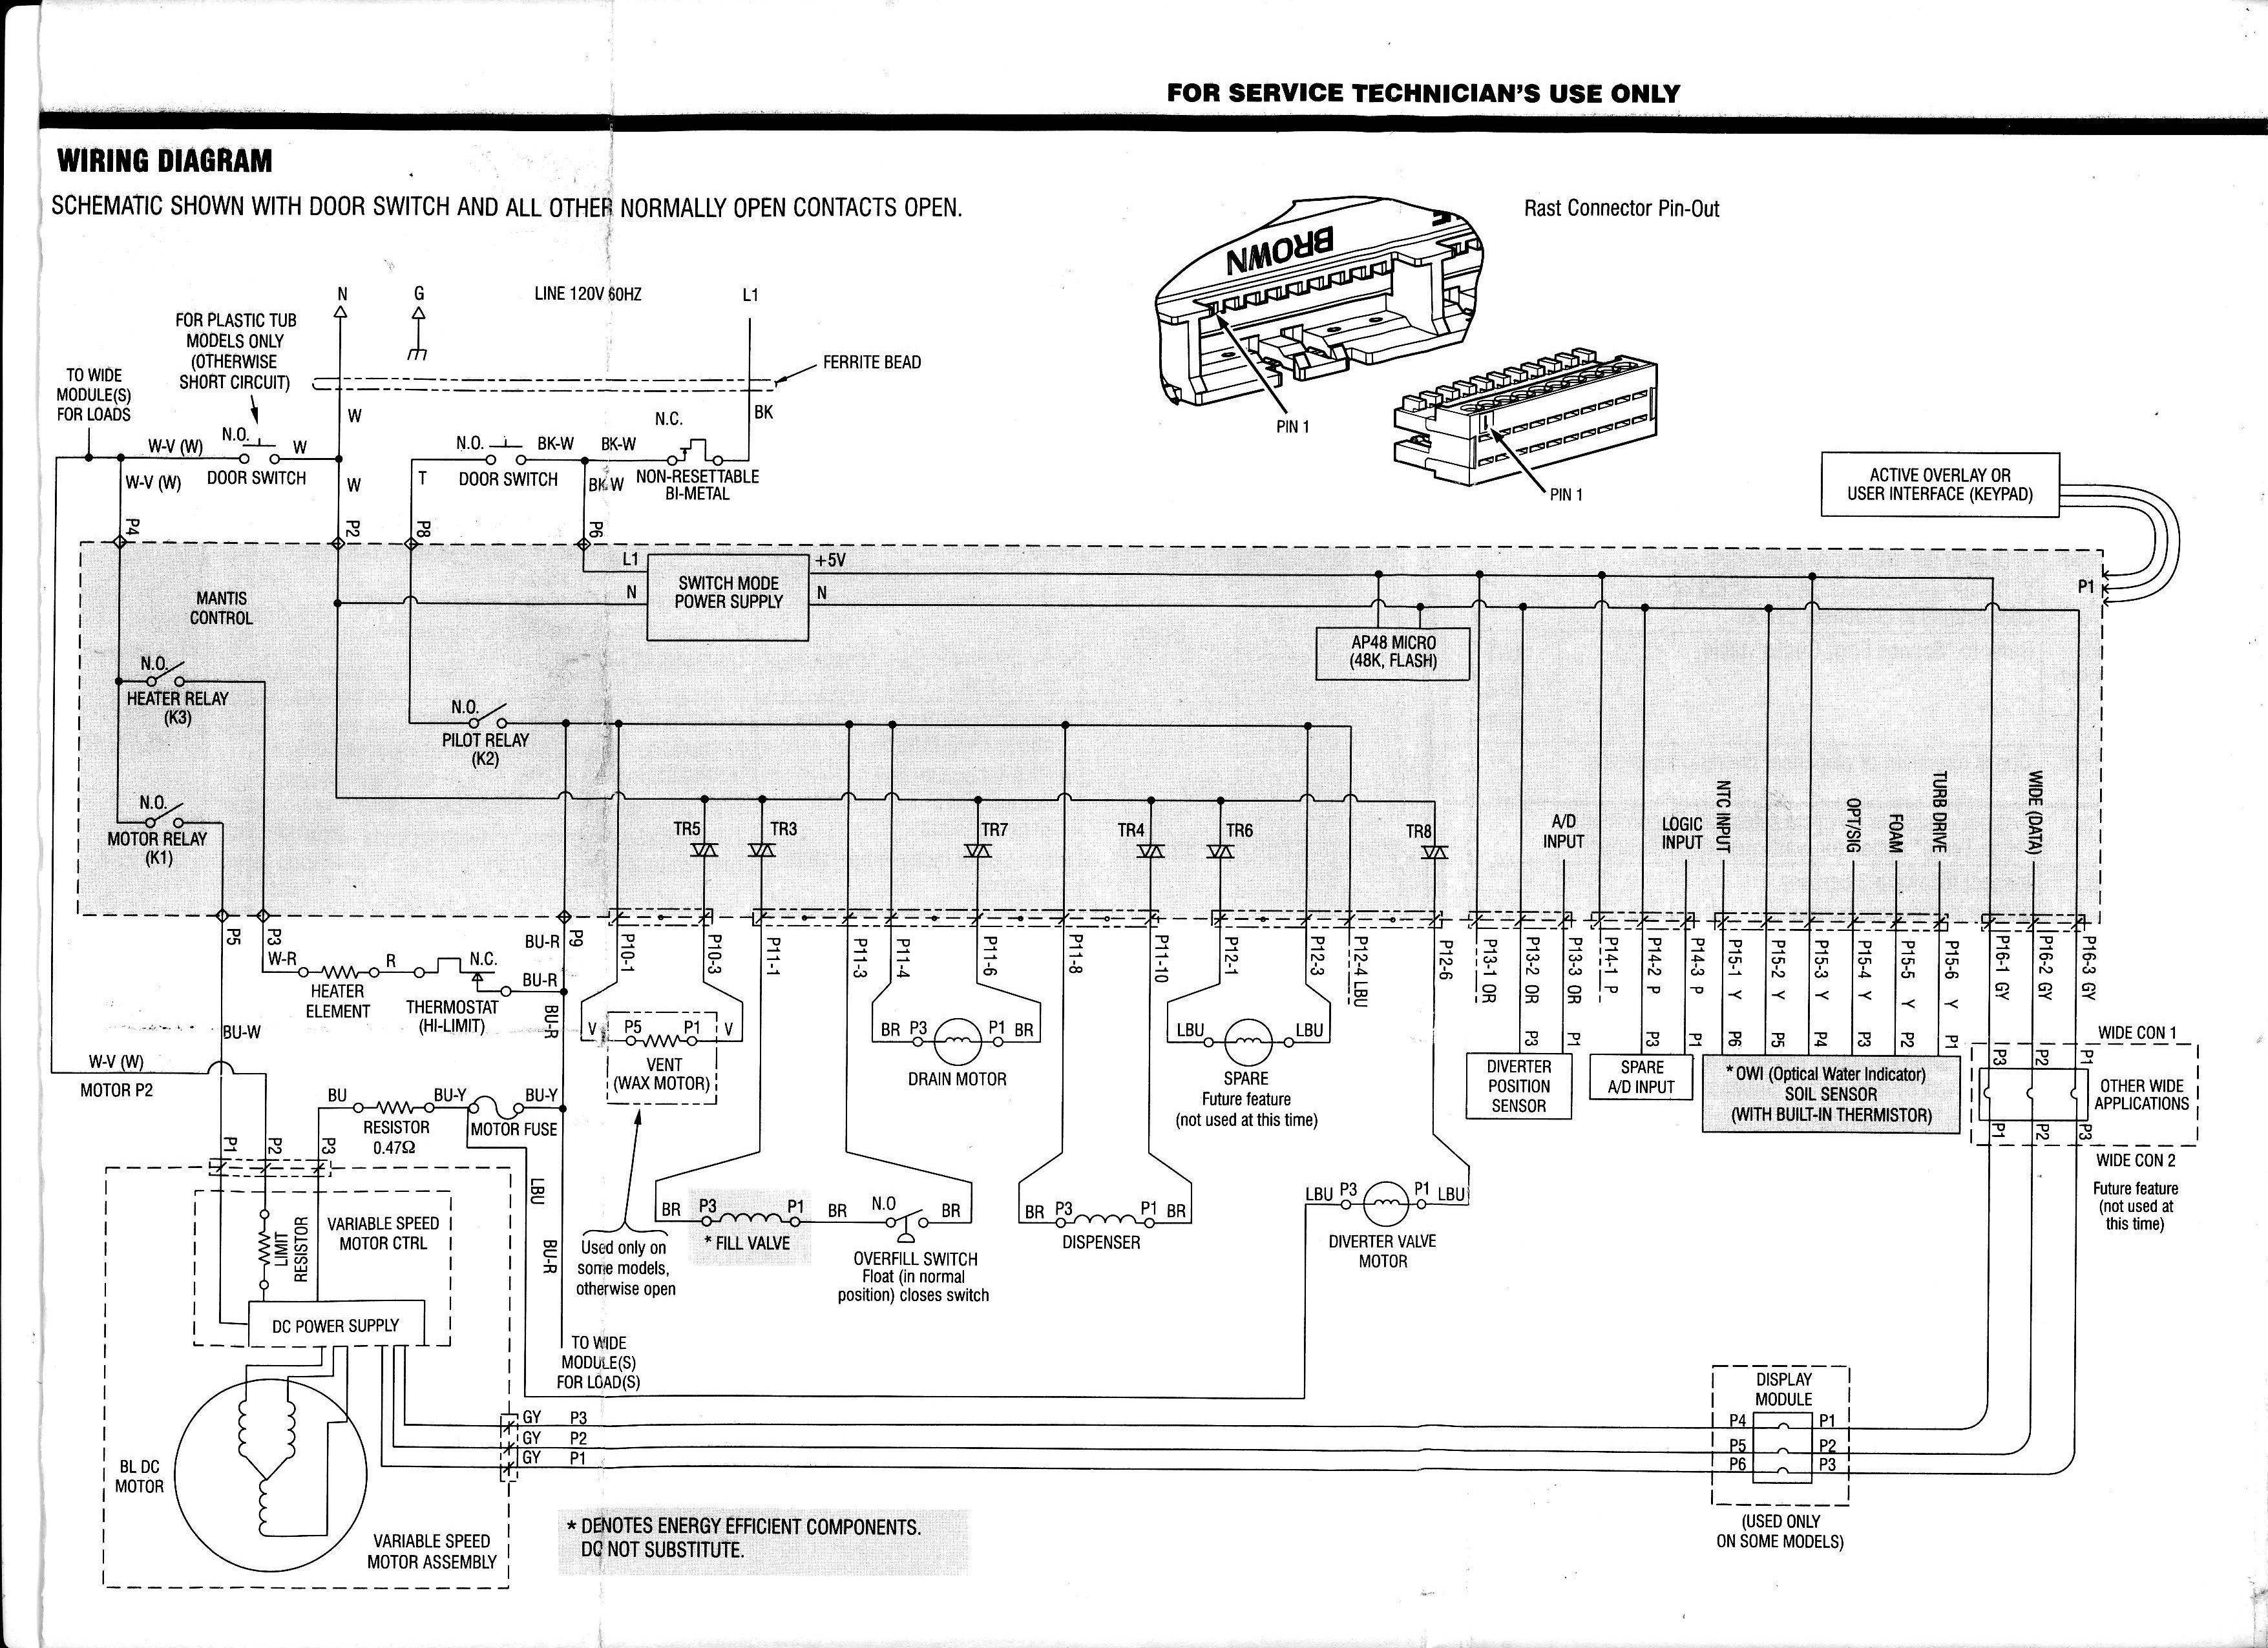 Ge Rr7 Relay Wiring Diagram from mainetreasurechest.com